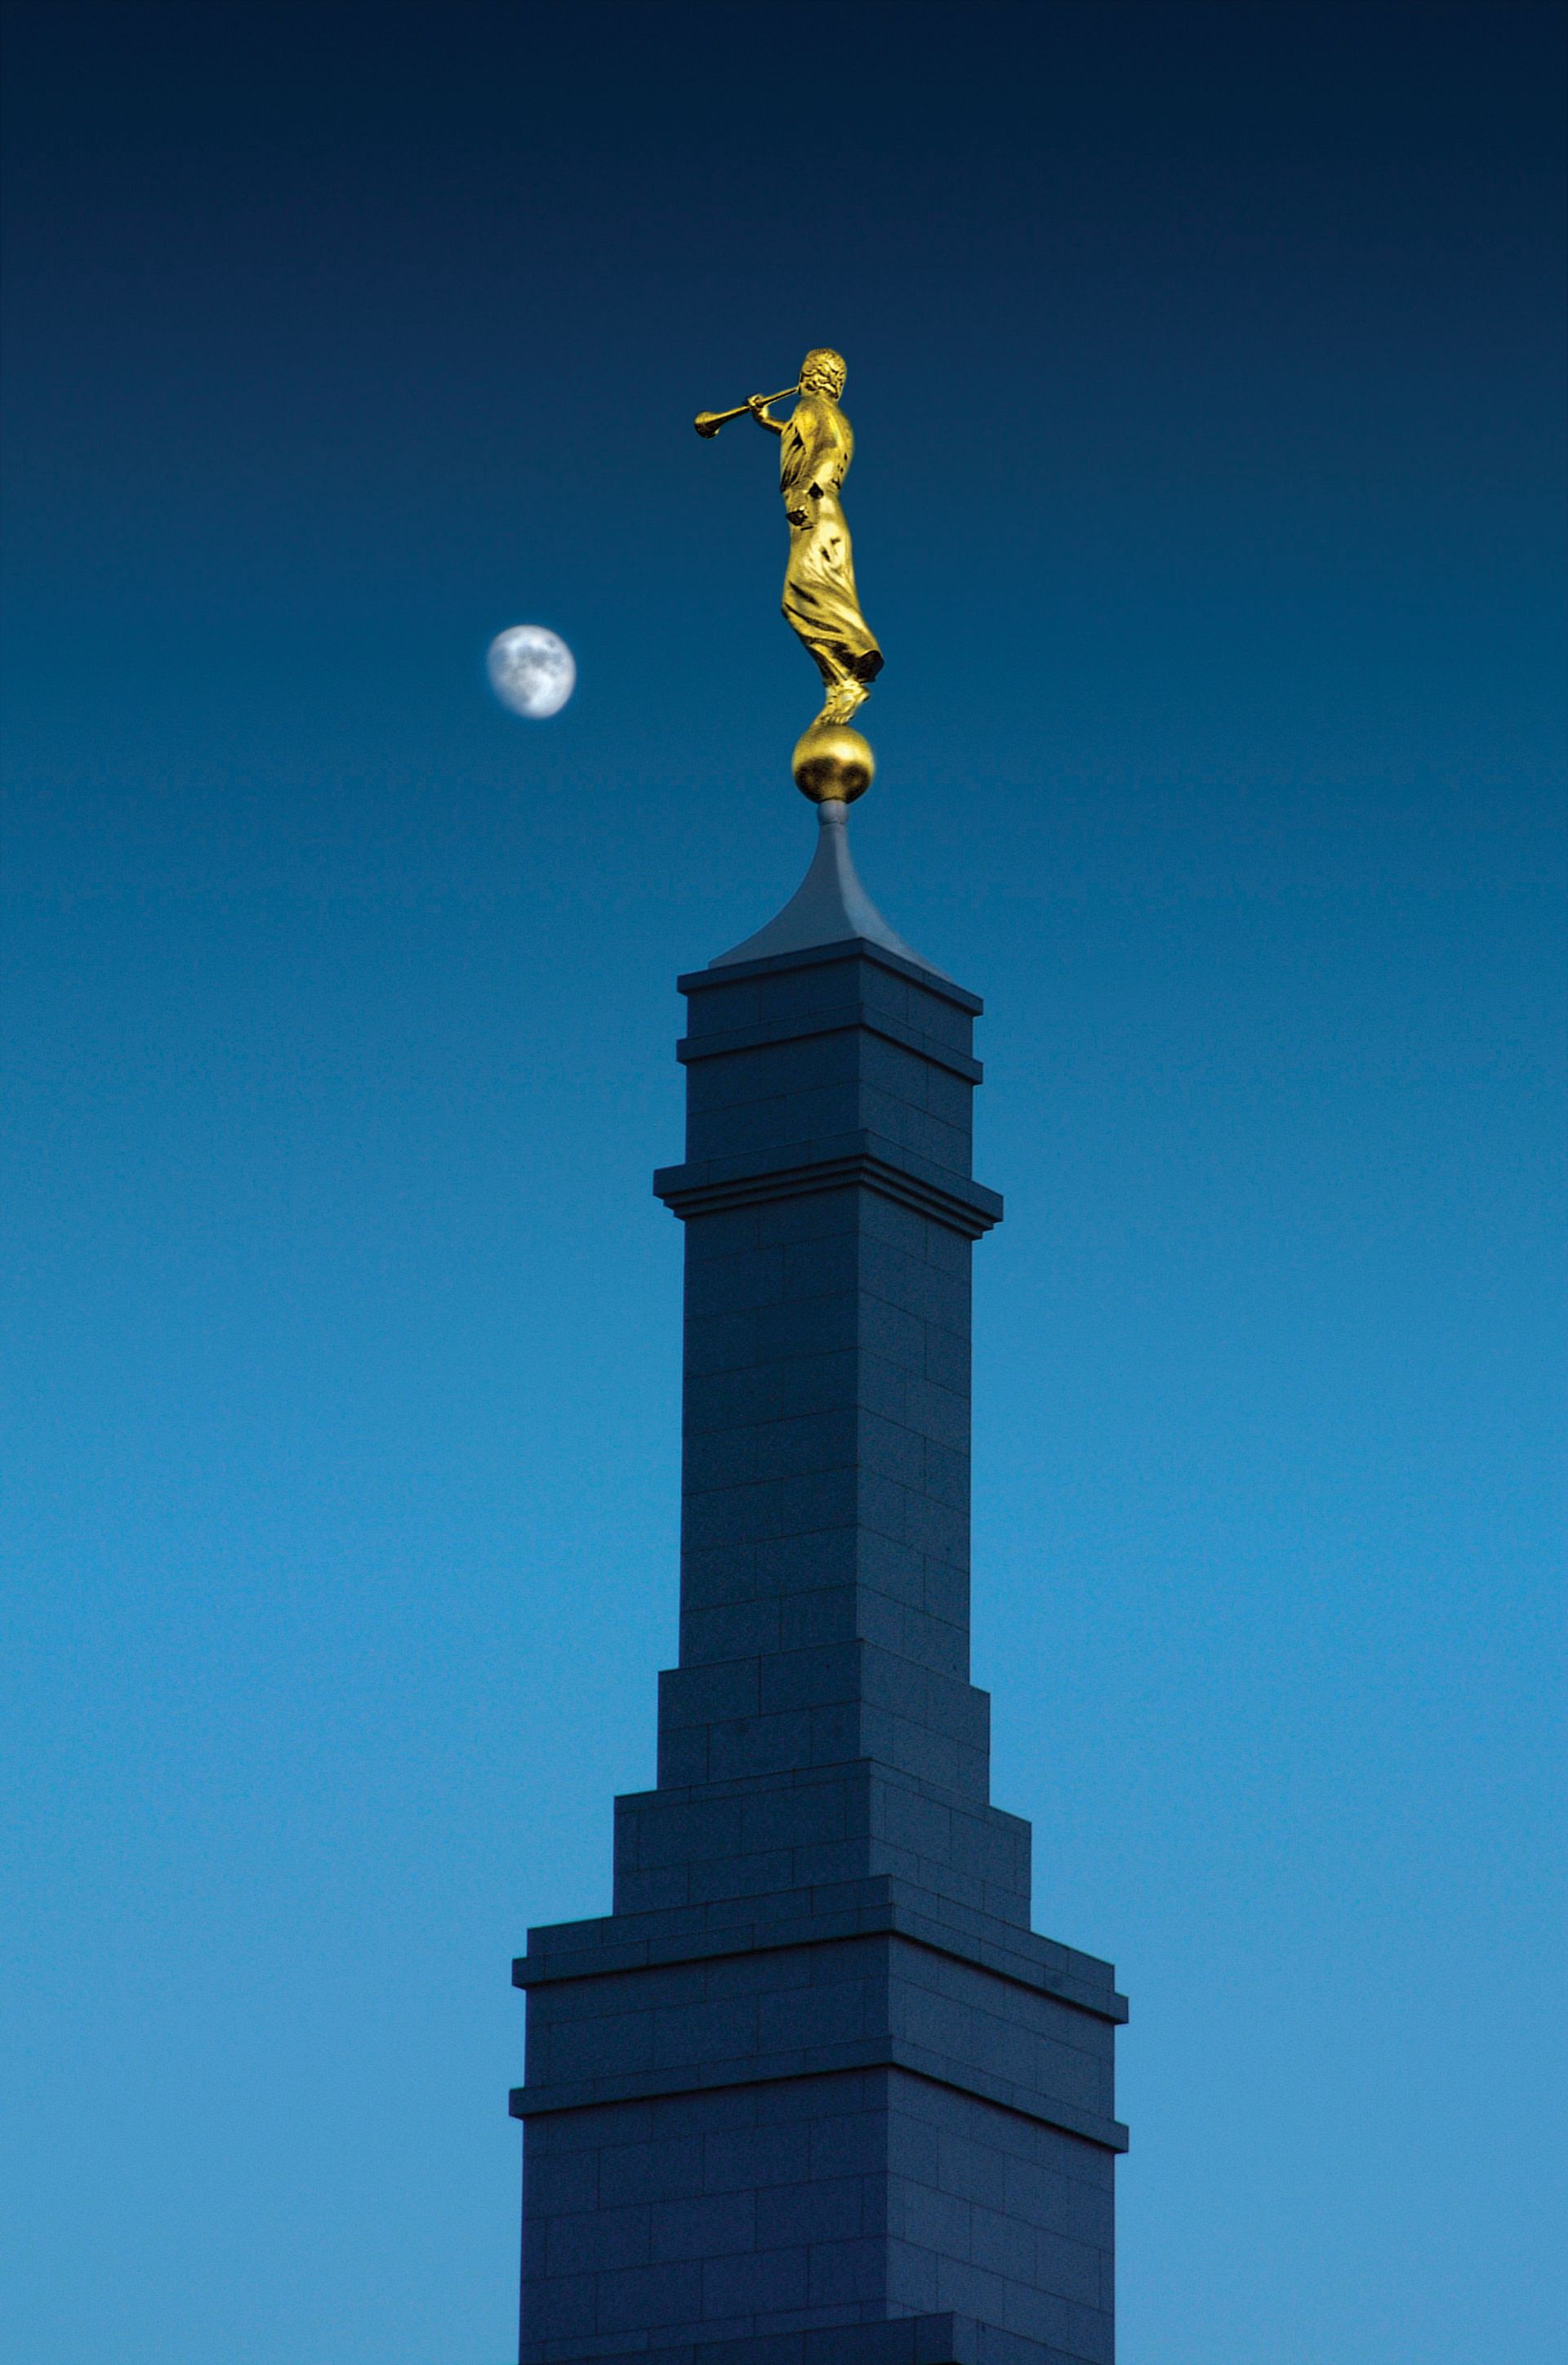 A view of the spire of the Fresno California Temple at night, with the angel Moroni on top.